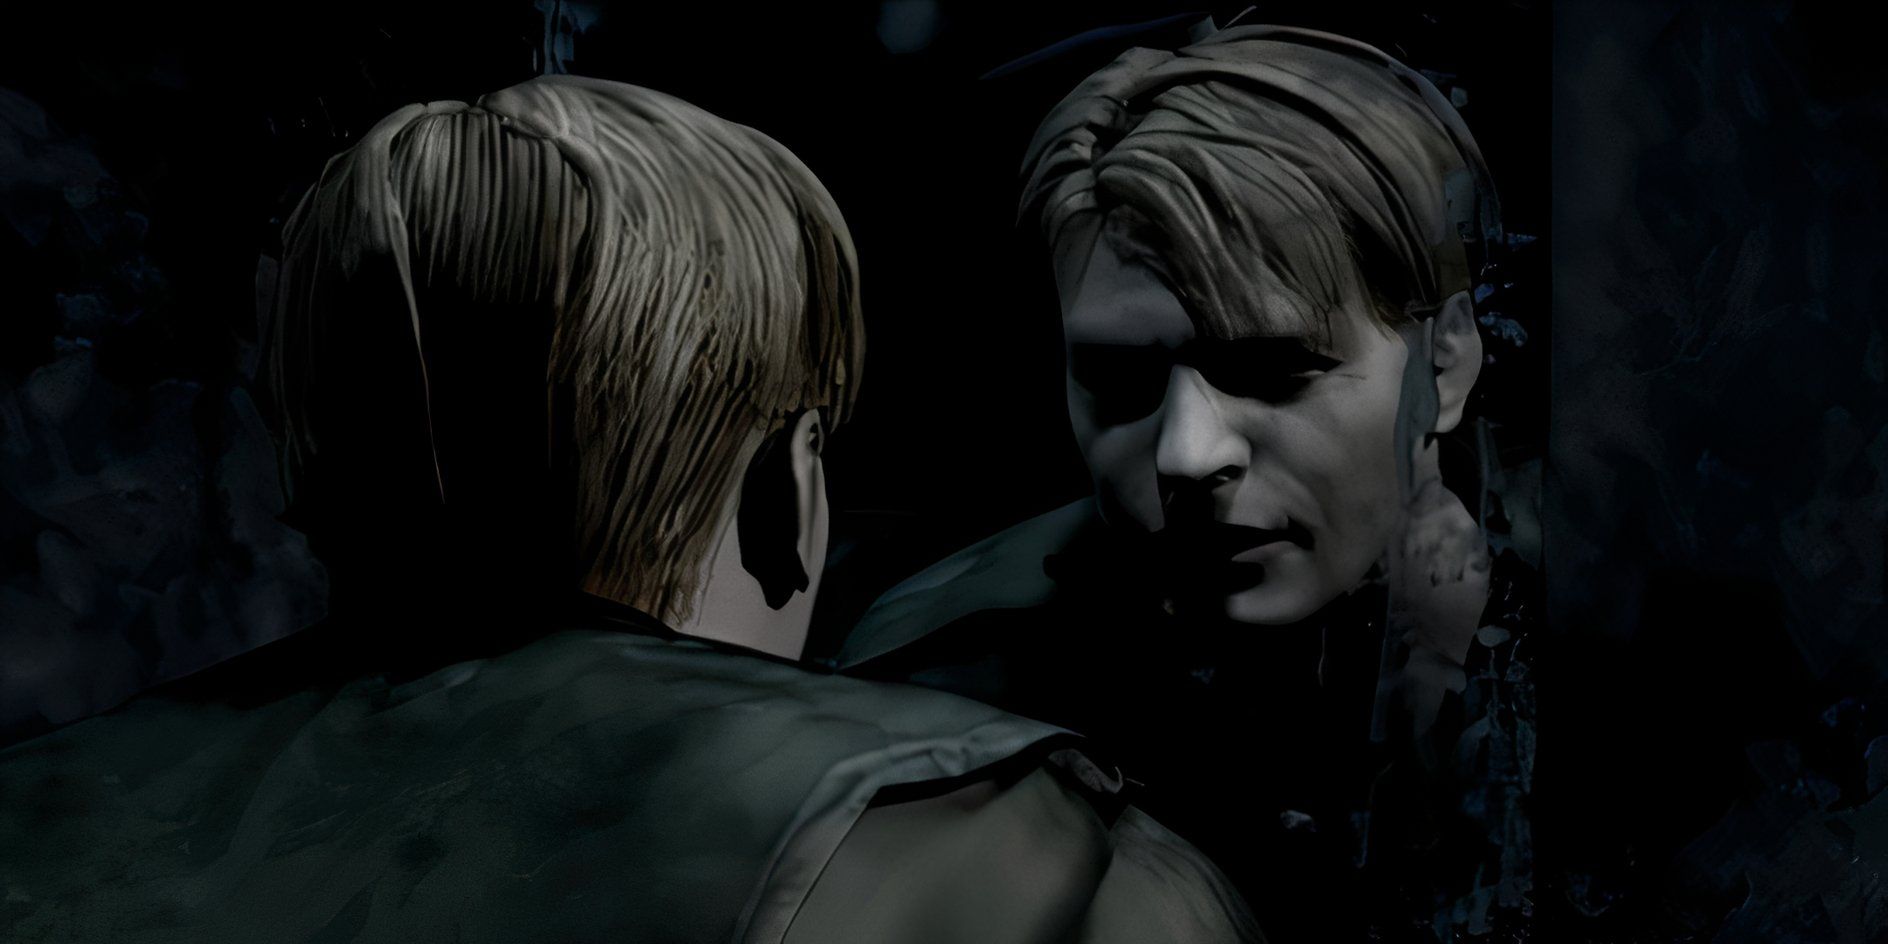 James Silent Hill 2 mirror in opening scene